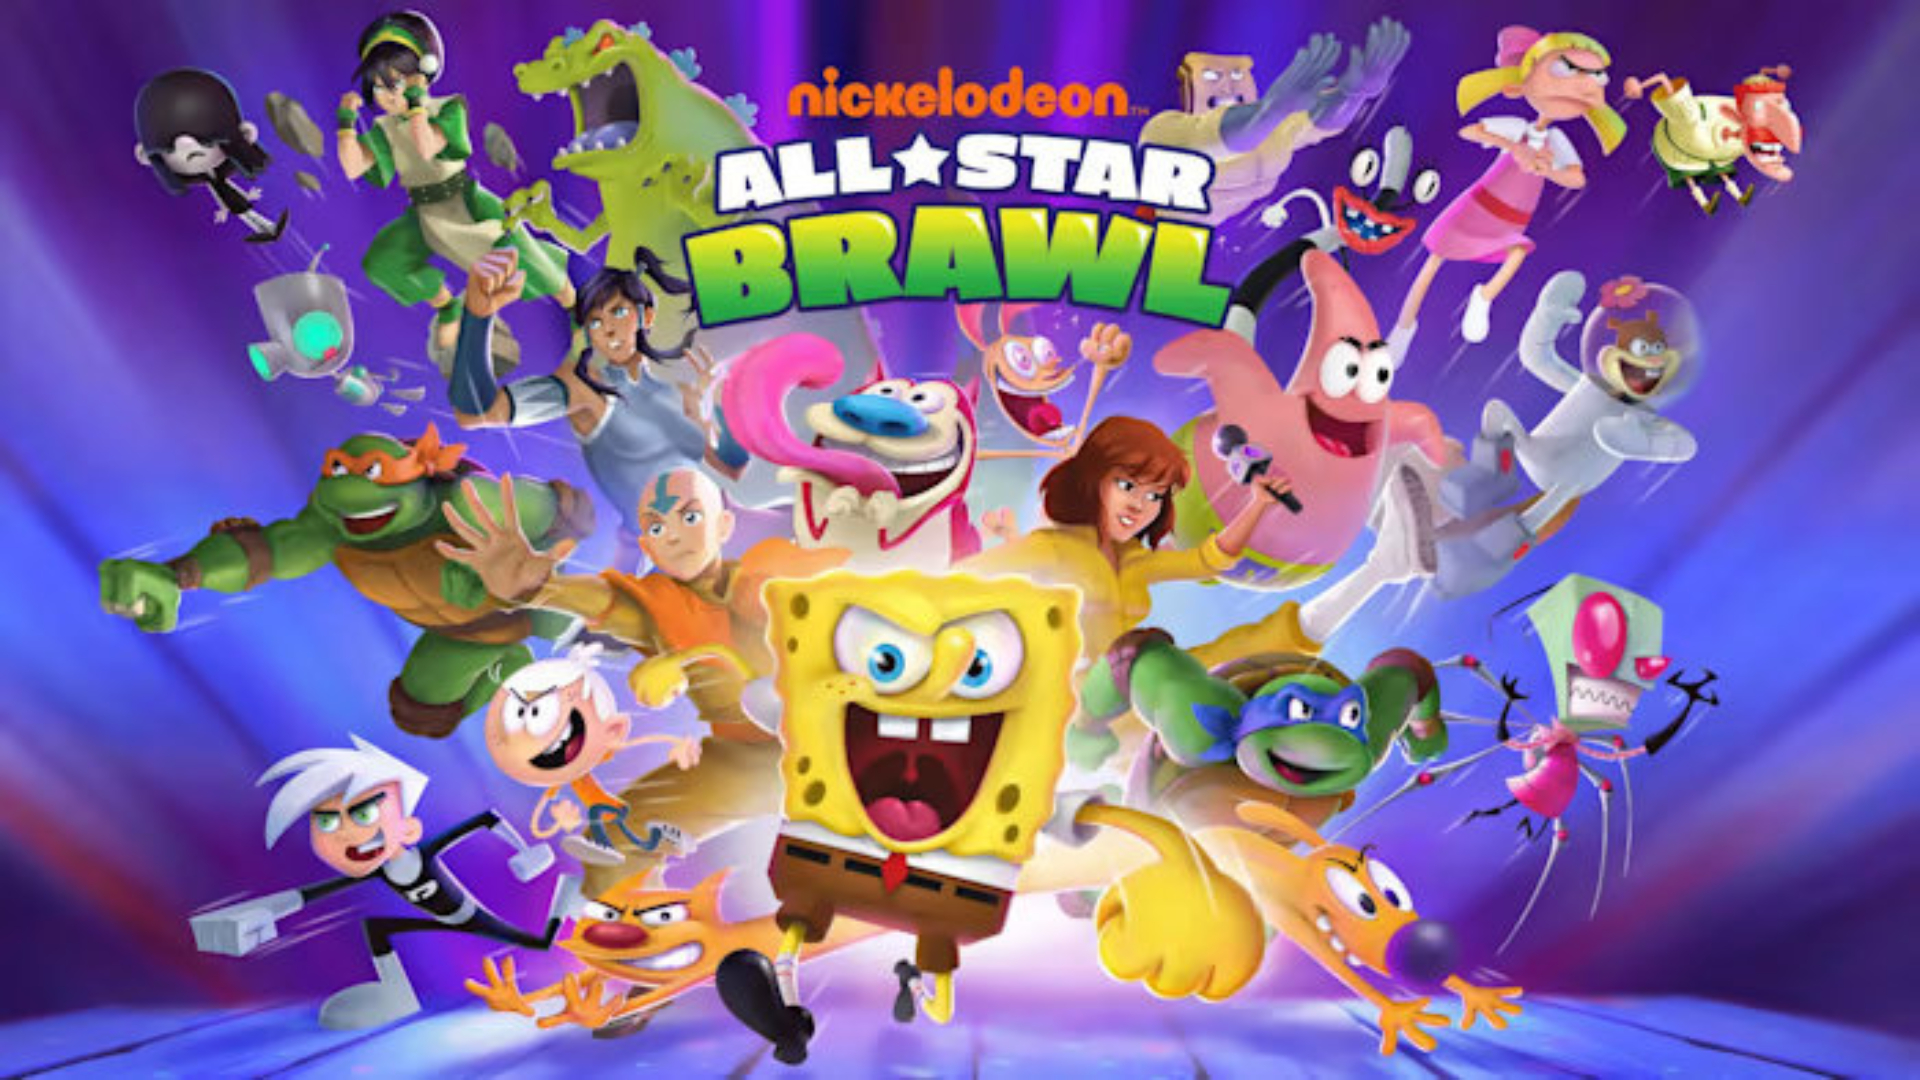 A group of Nickelodeon characters with SpongeBob leading the charge